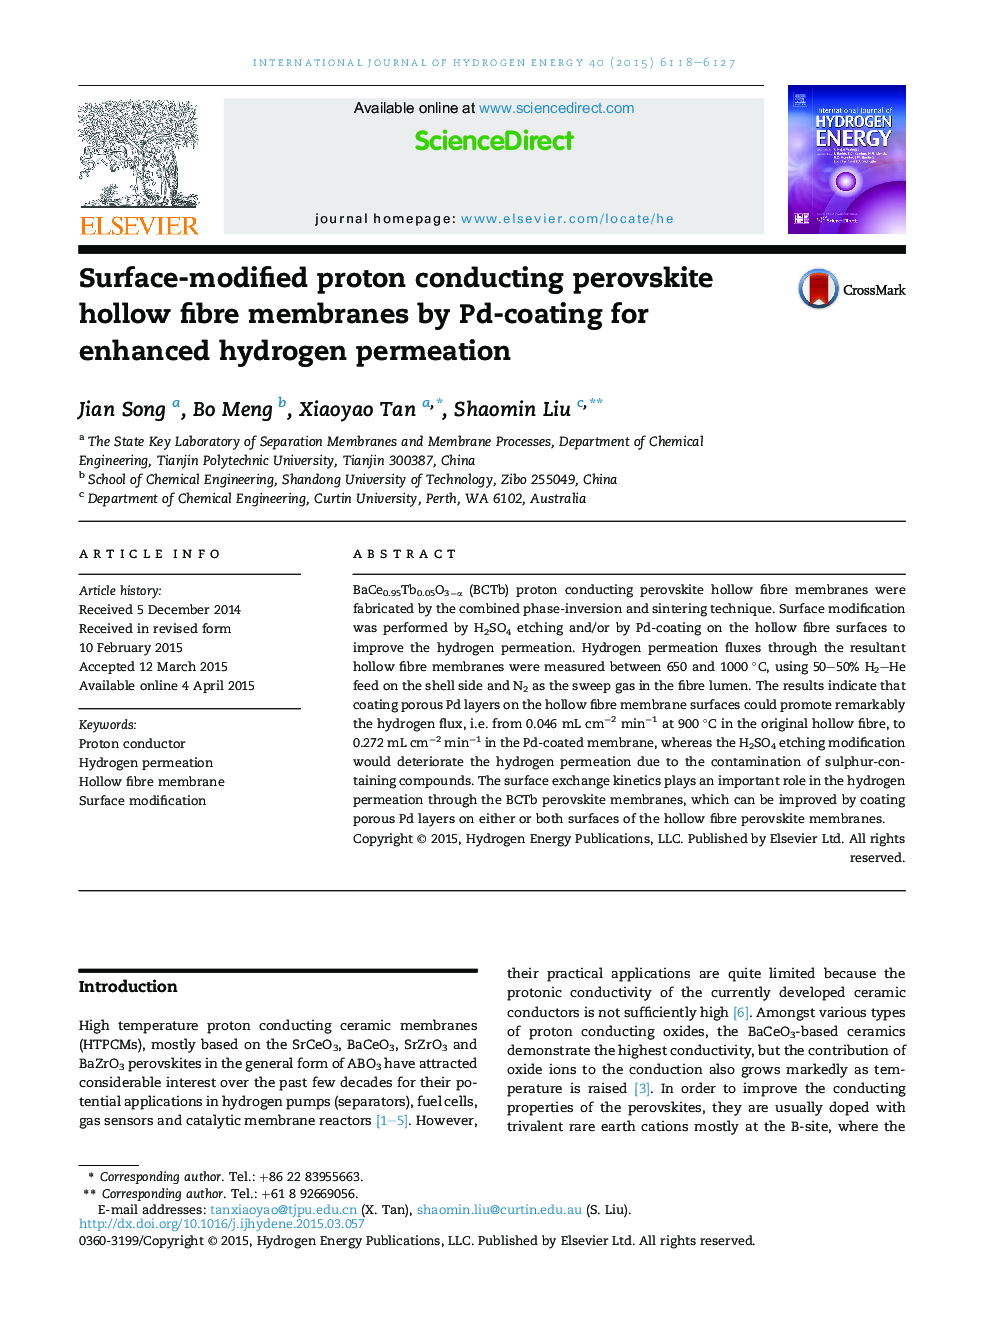 Surface-modified proton conducting perovskite hollow fibre membranes by Pd-coating for enhanced hydrogen permeation